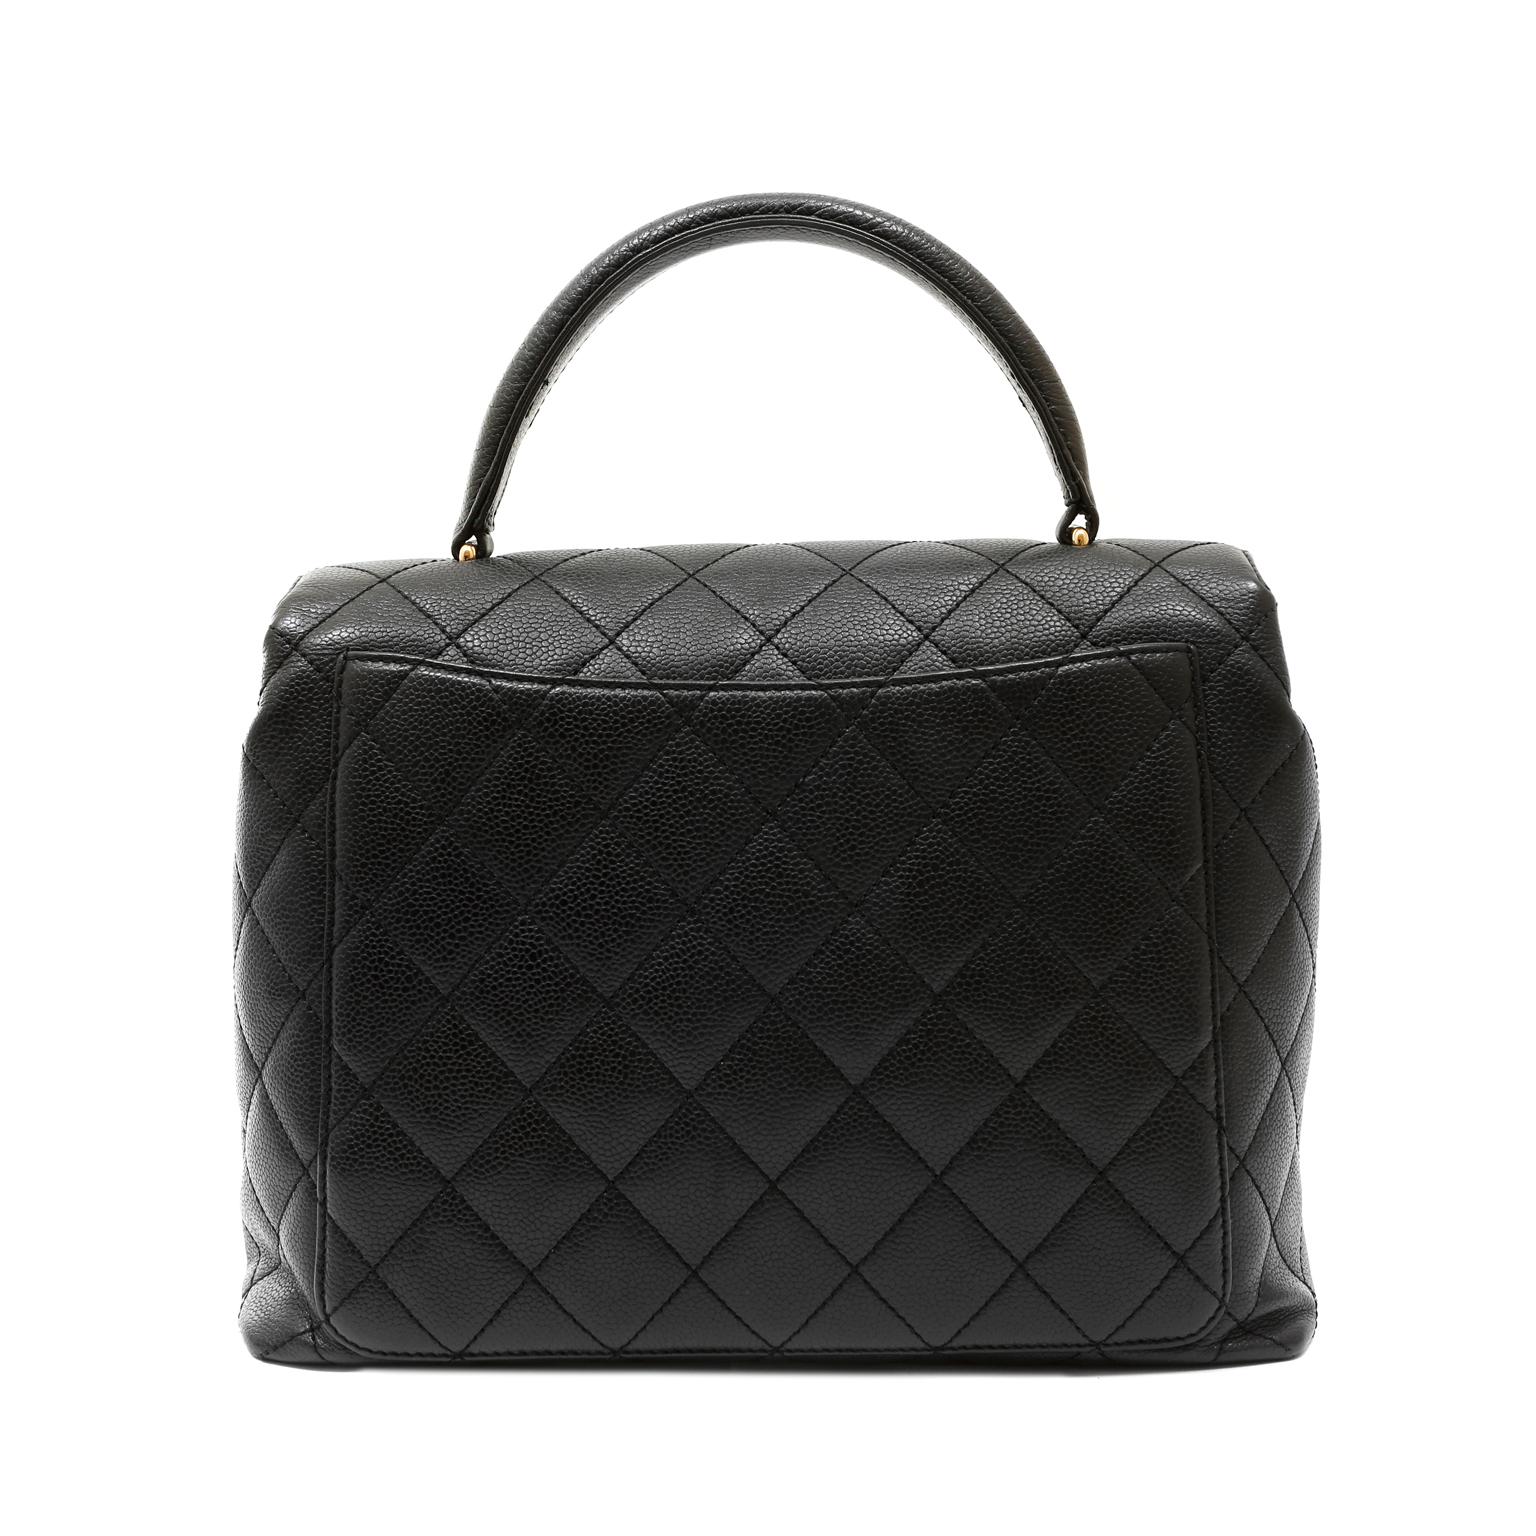 This authentic Chanel Black Quilted Caviar Top Handle Bag is in excellent condition from the early 2000's.  Perfectly scaled, this ladylike silhouette is able to transition easily from day to evening all year long.
Durable and textured black caviar